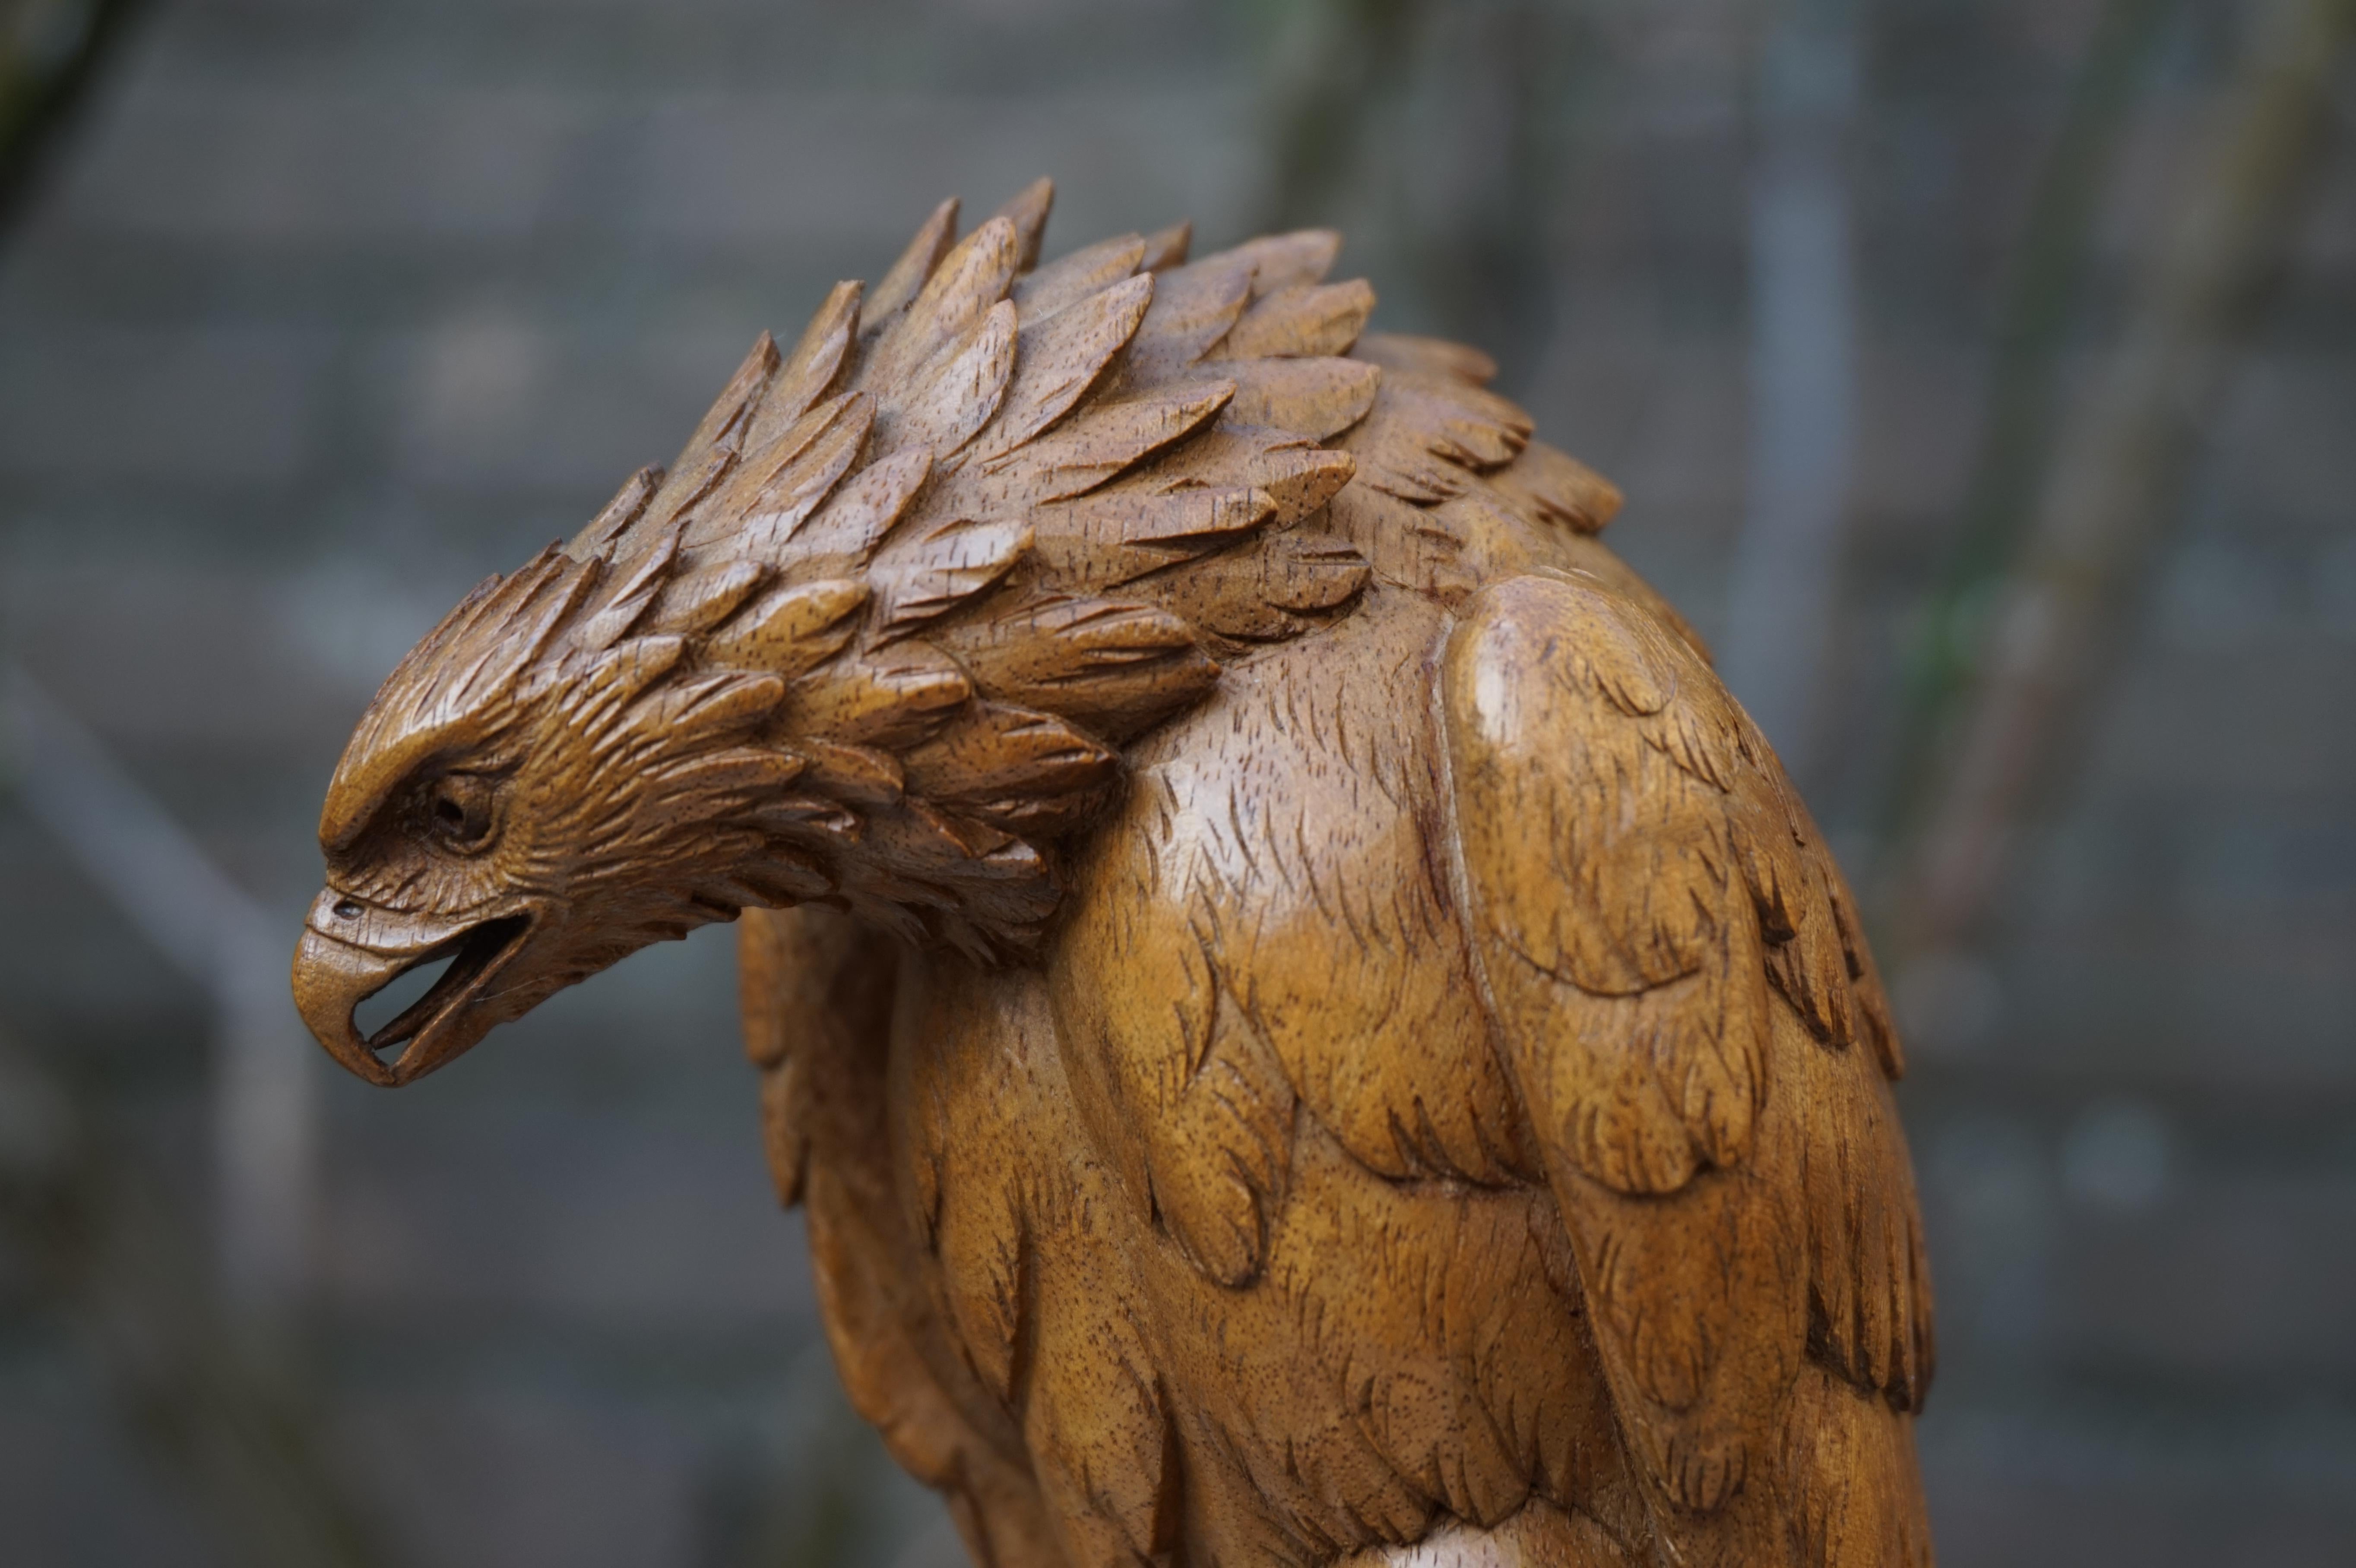 Stunning small Black Forest sculpture.

This top quality carved eagle from the heart of the Swiss Black Forest truly reveils the highest level of craftsmanship of the best artisans in that era and area. For a small sculpture to have such incredible